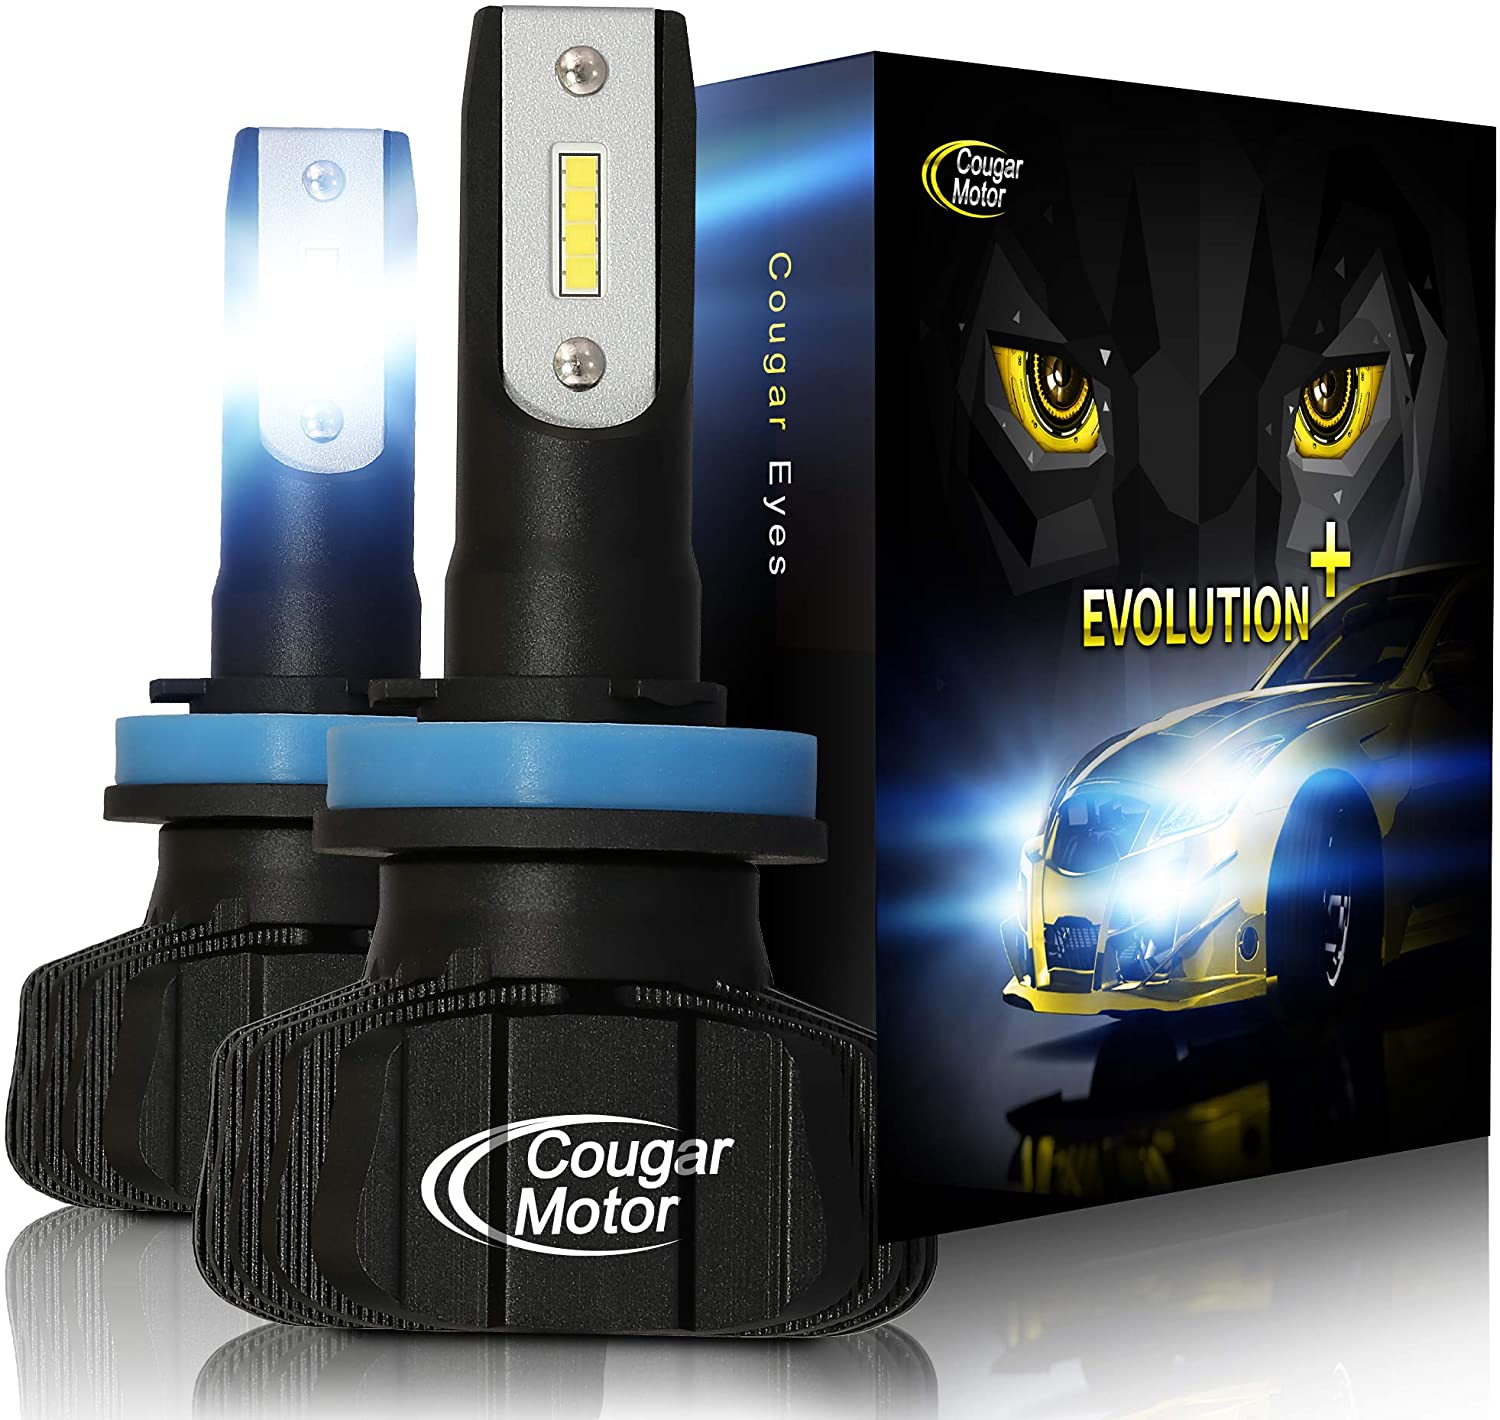 H11 Led Headlights For Cars Quick Installation | Cougar Motor